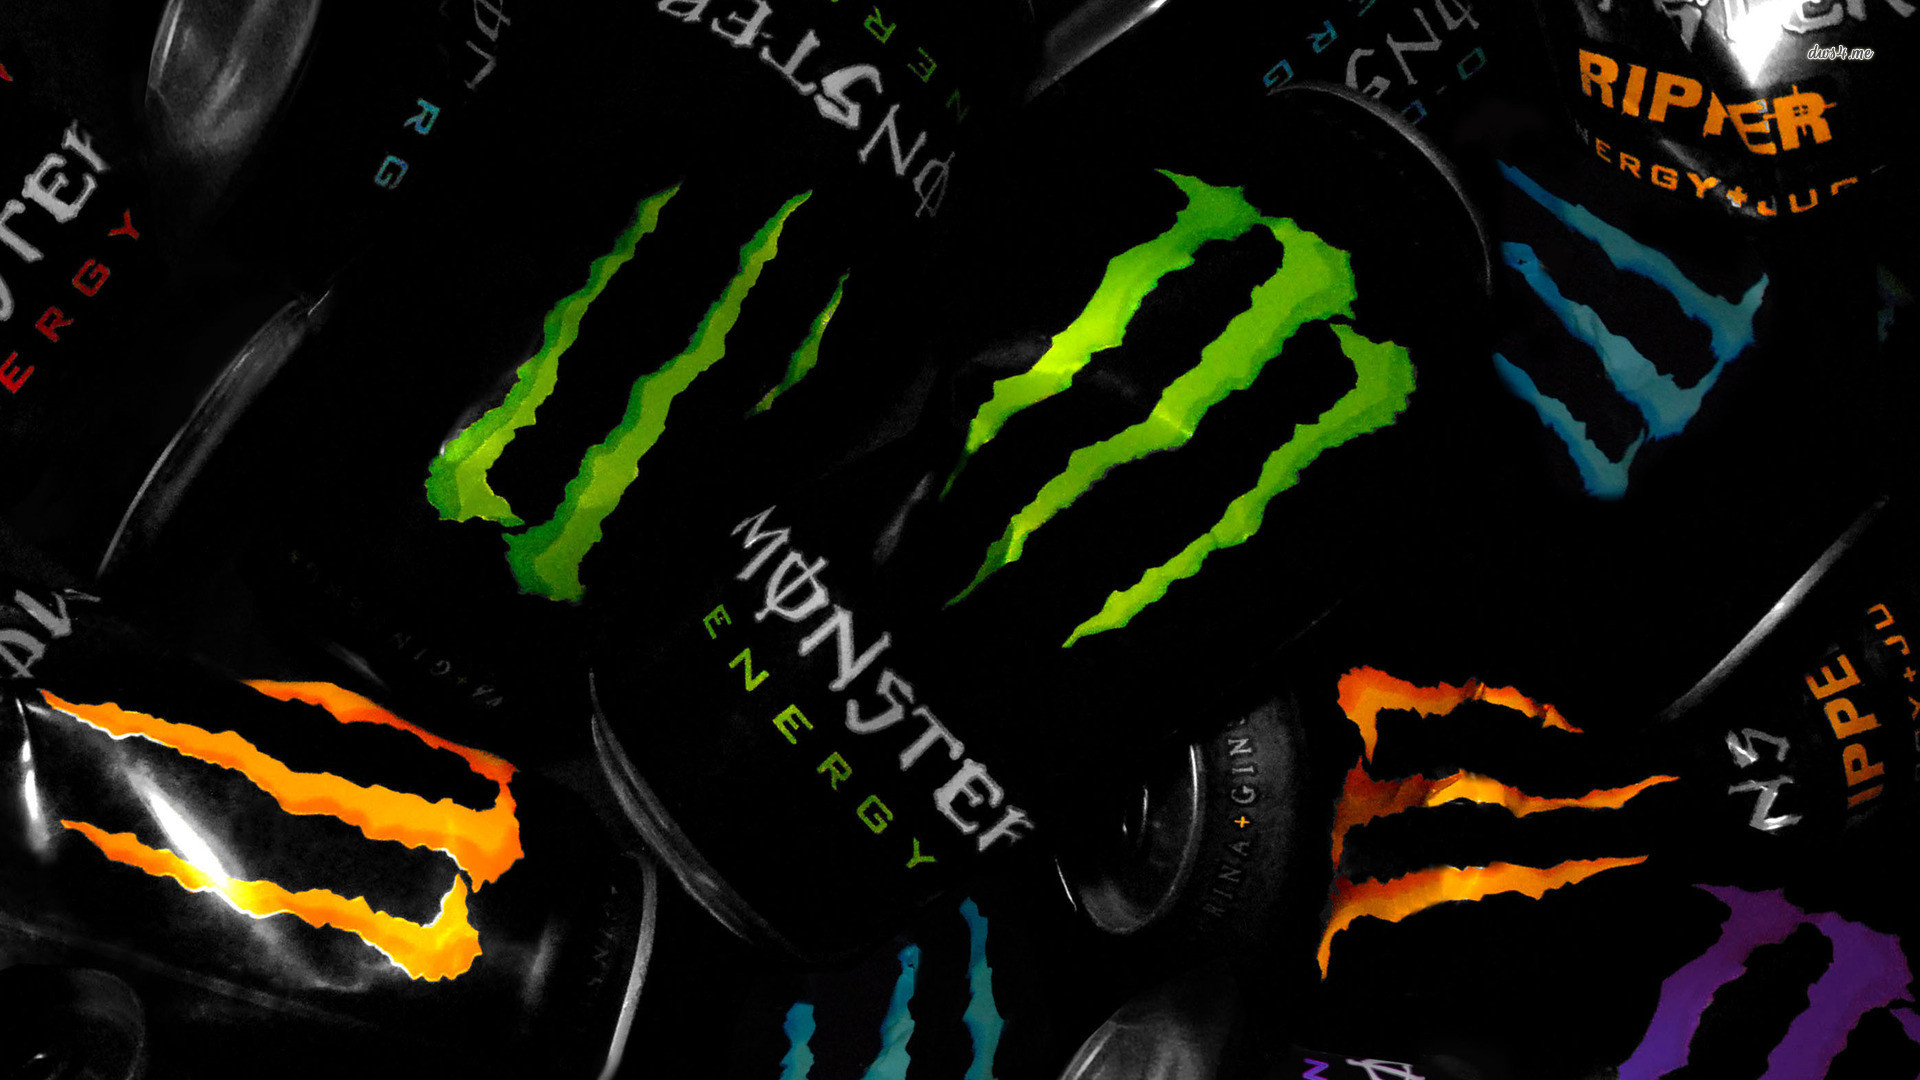 1920x1080 Explore Wallpaper Backgrounds and more! Monster Energy Drink